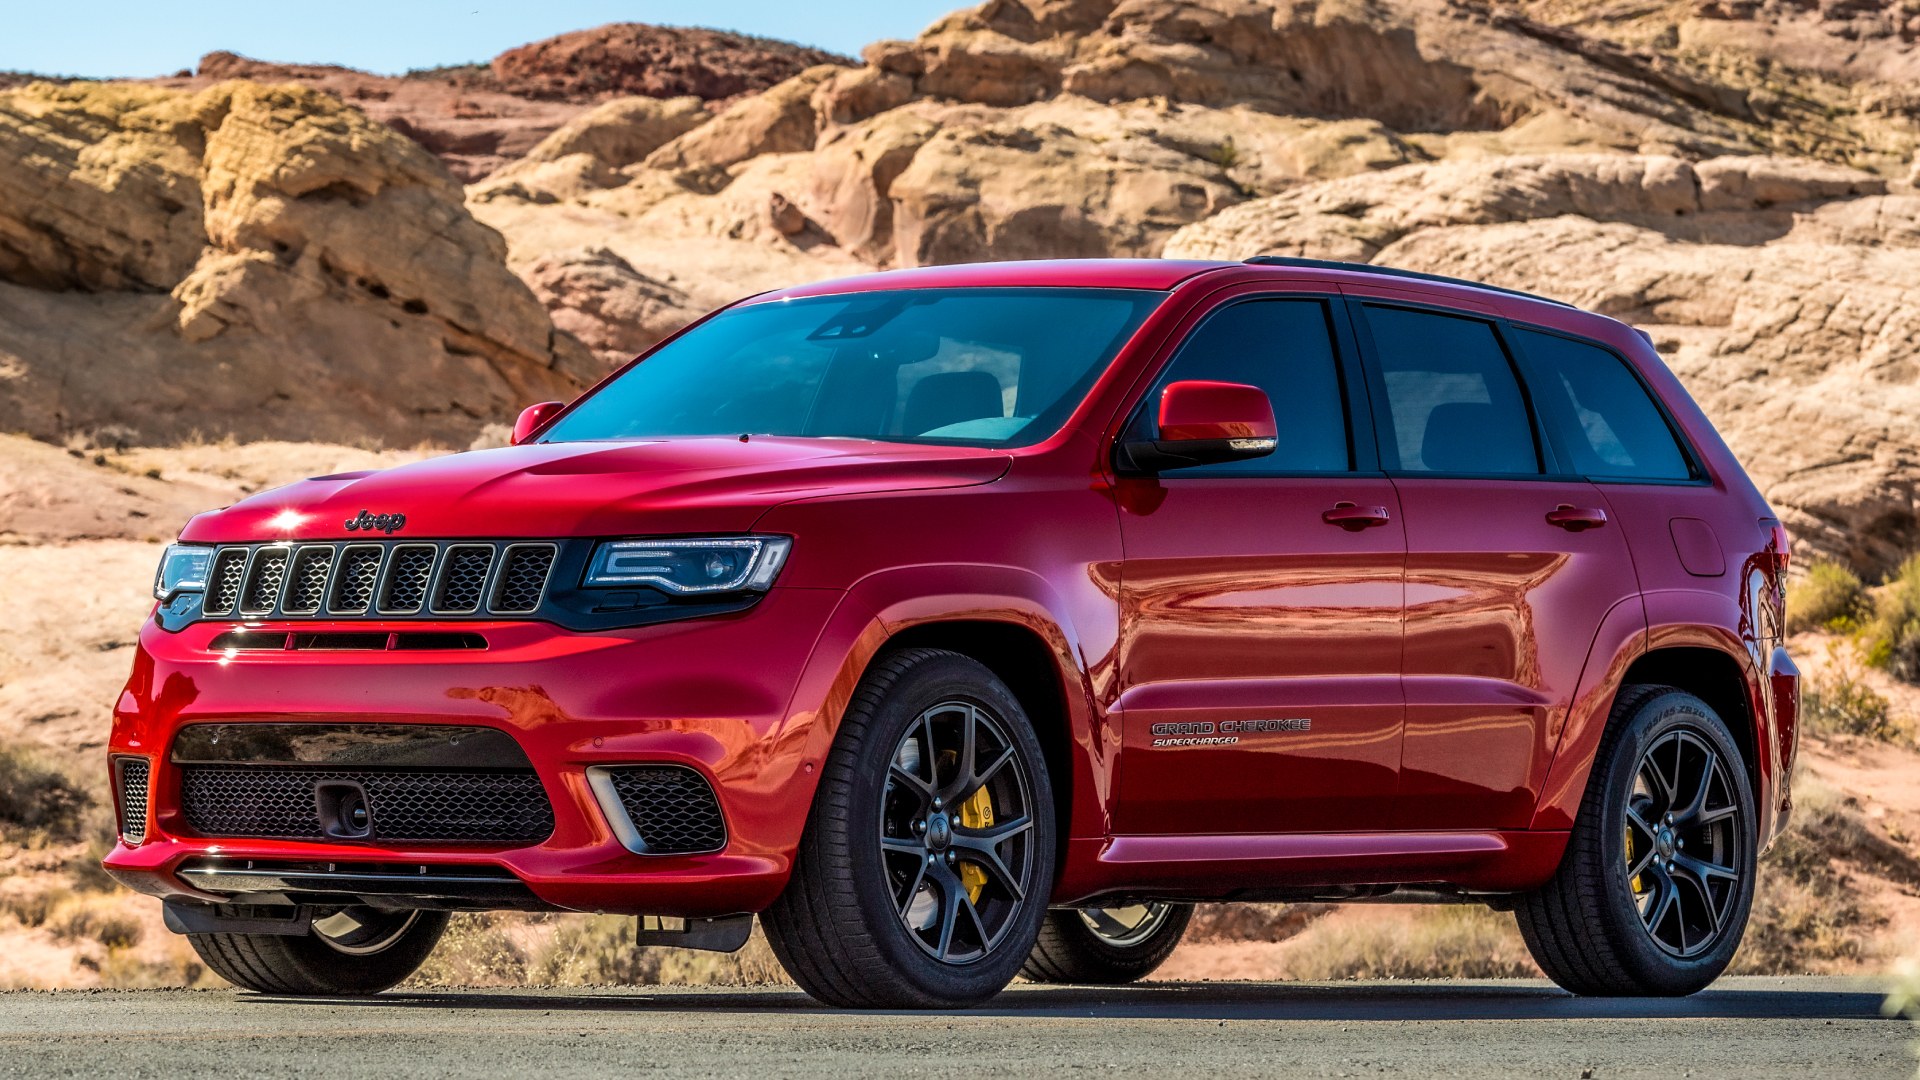 Jeep Grand Cherokee SRT front profile in the mountains